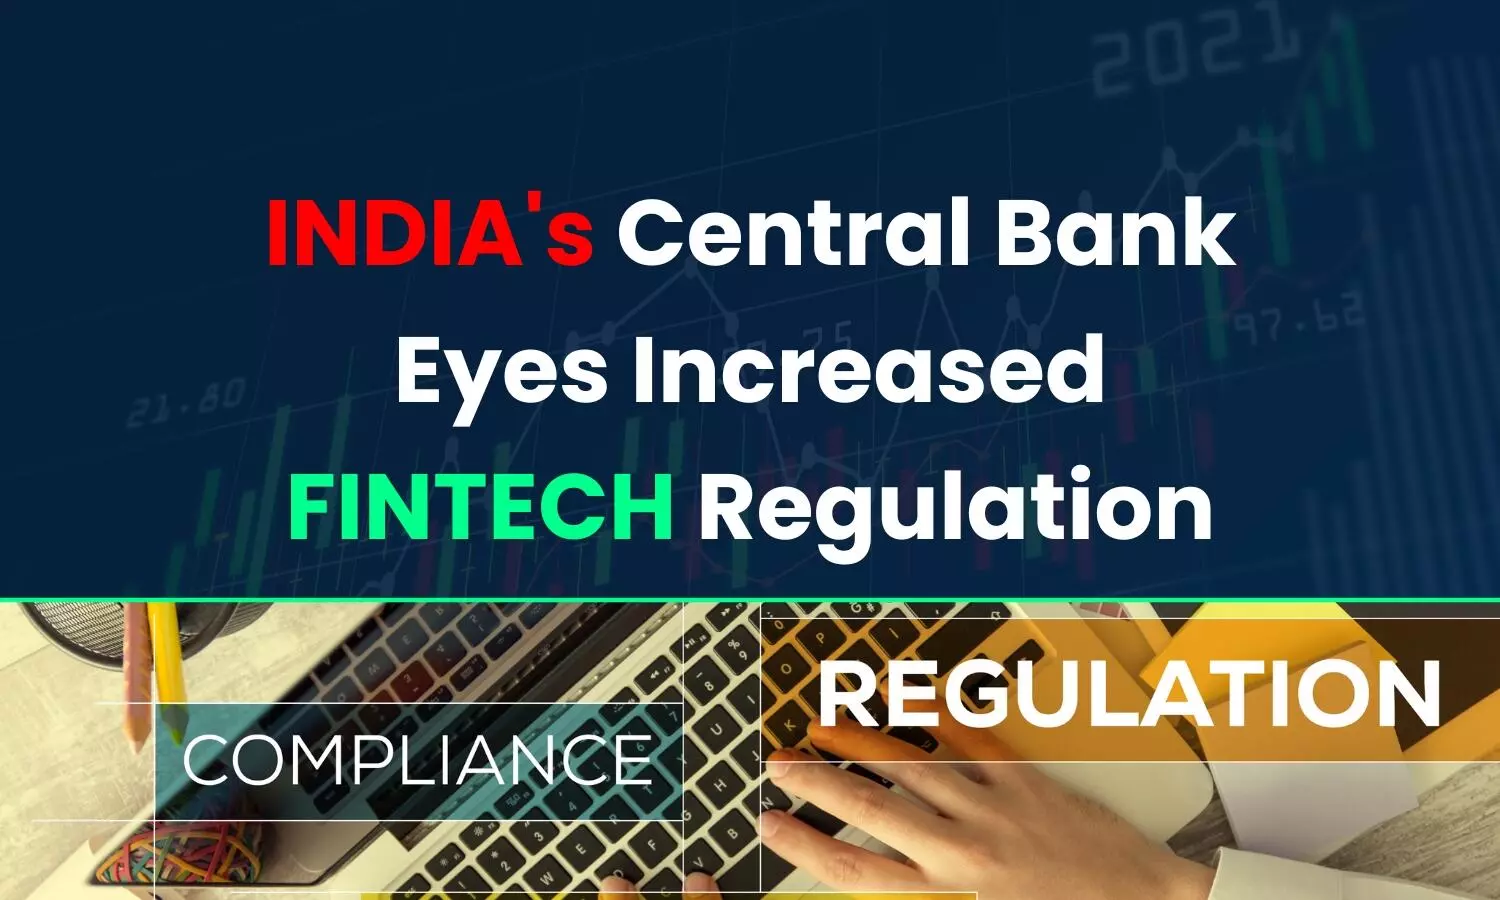 India’s Central Bank Eyes Increased Fintech Regulation